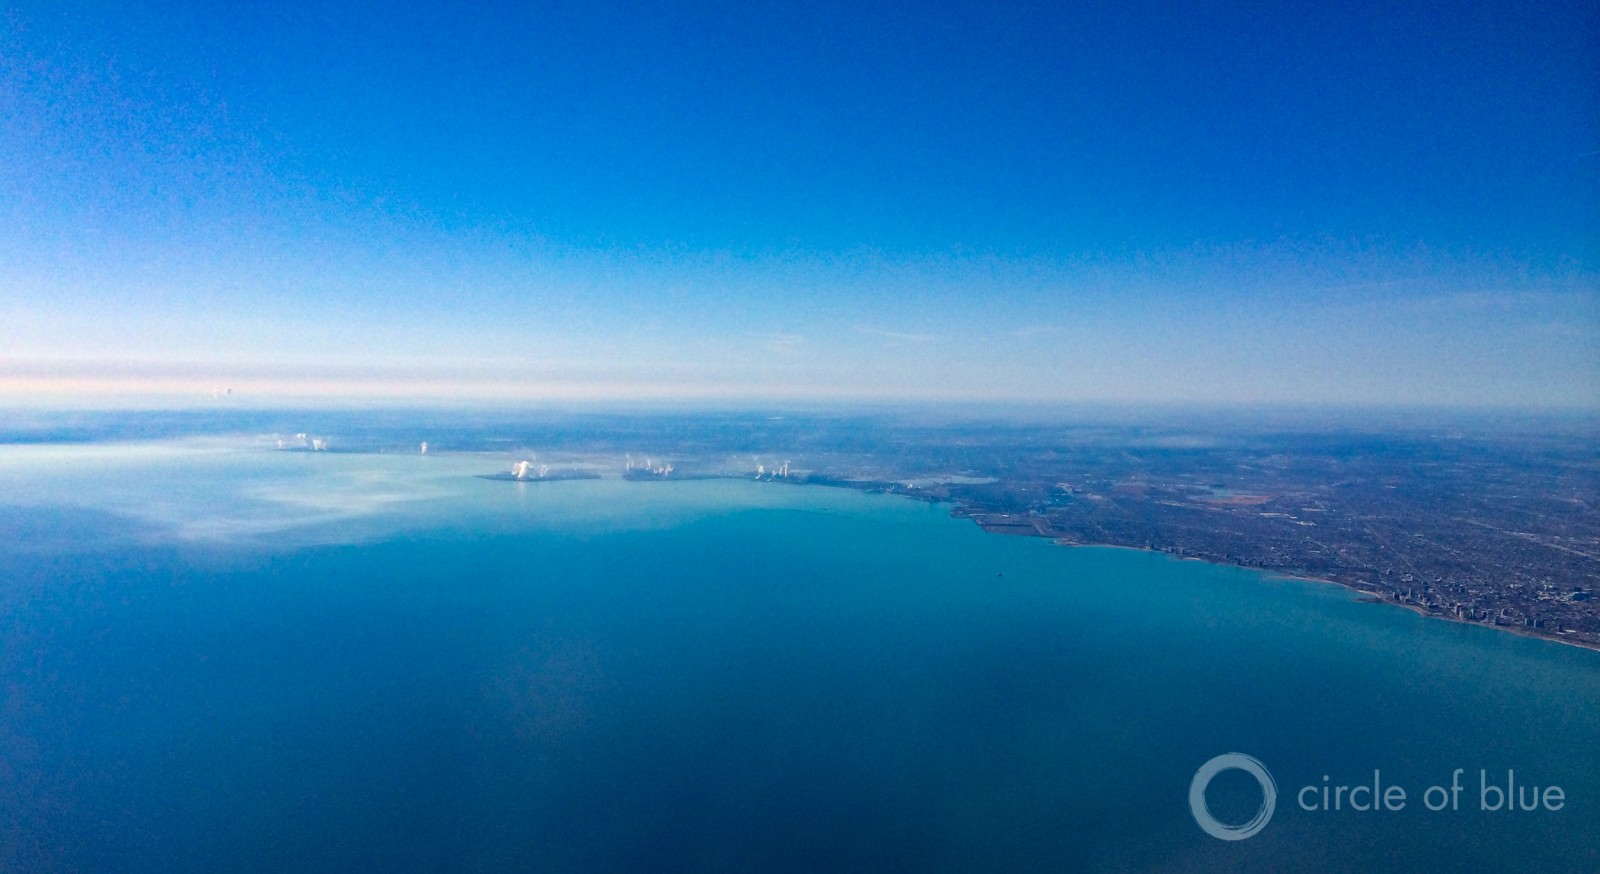 The city of Waukesha, Wisconsin, located just outside of the Great Lakes Basin, is asking to divert Lake Michigan water for its municipal supplies. The governors of eight Great Lakes states will vote on the proposal Tuesday in Chicago, shown here. Photo © J. Carl Ganter / Circle of Blue